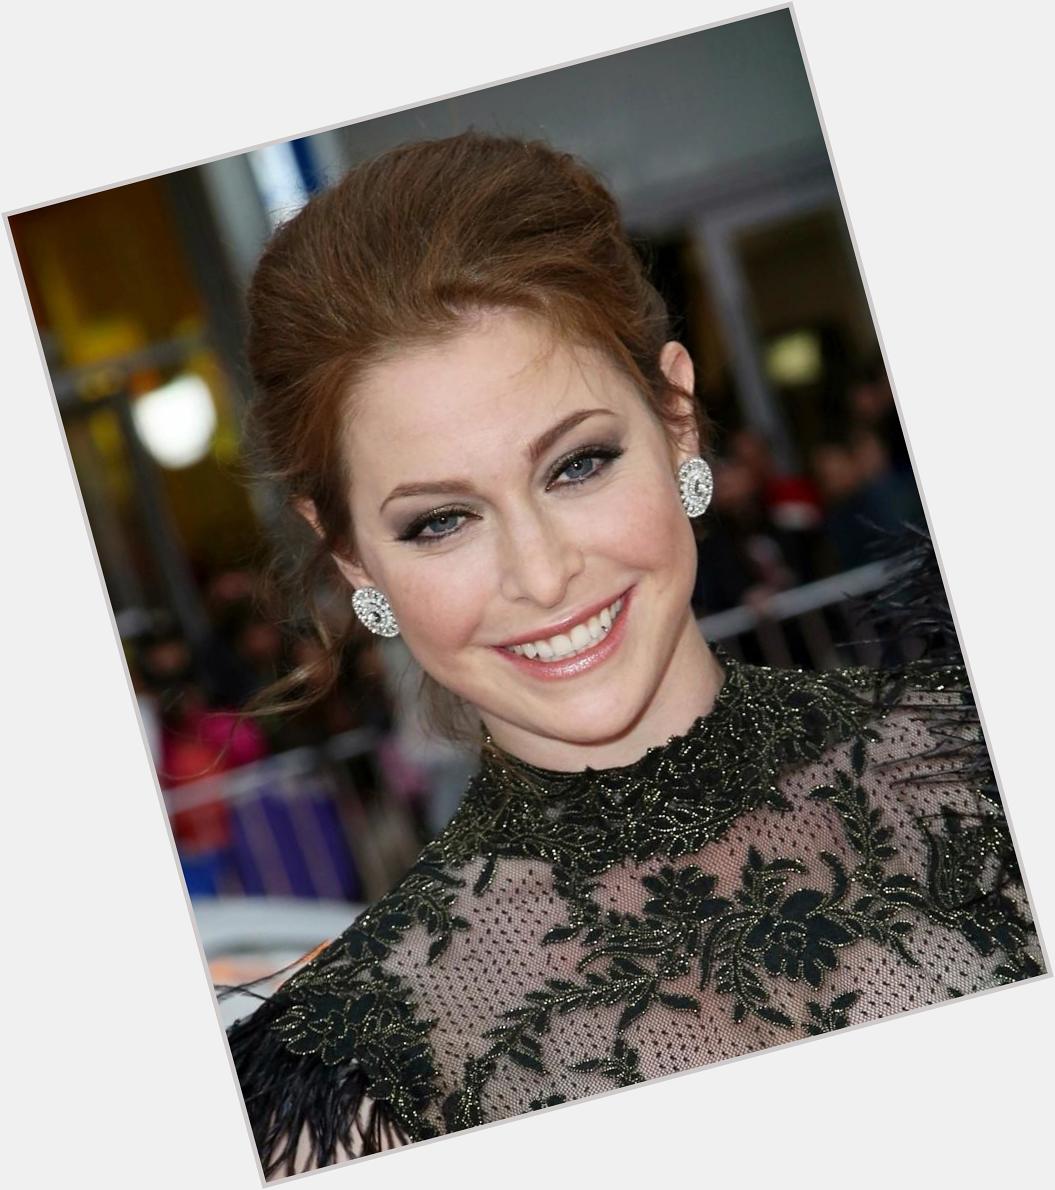 Happy birthday to former Stagecoach pupil Esmé Bianco, who turns 33 today! 